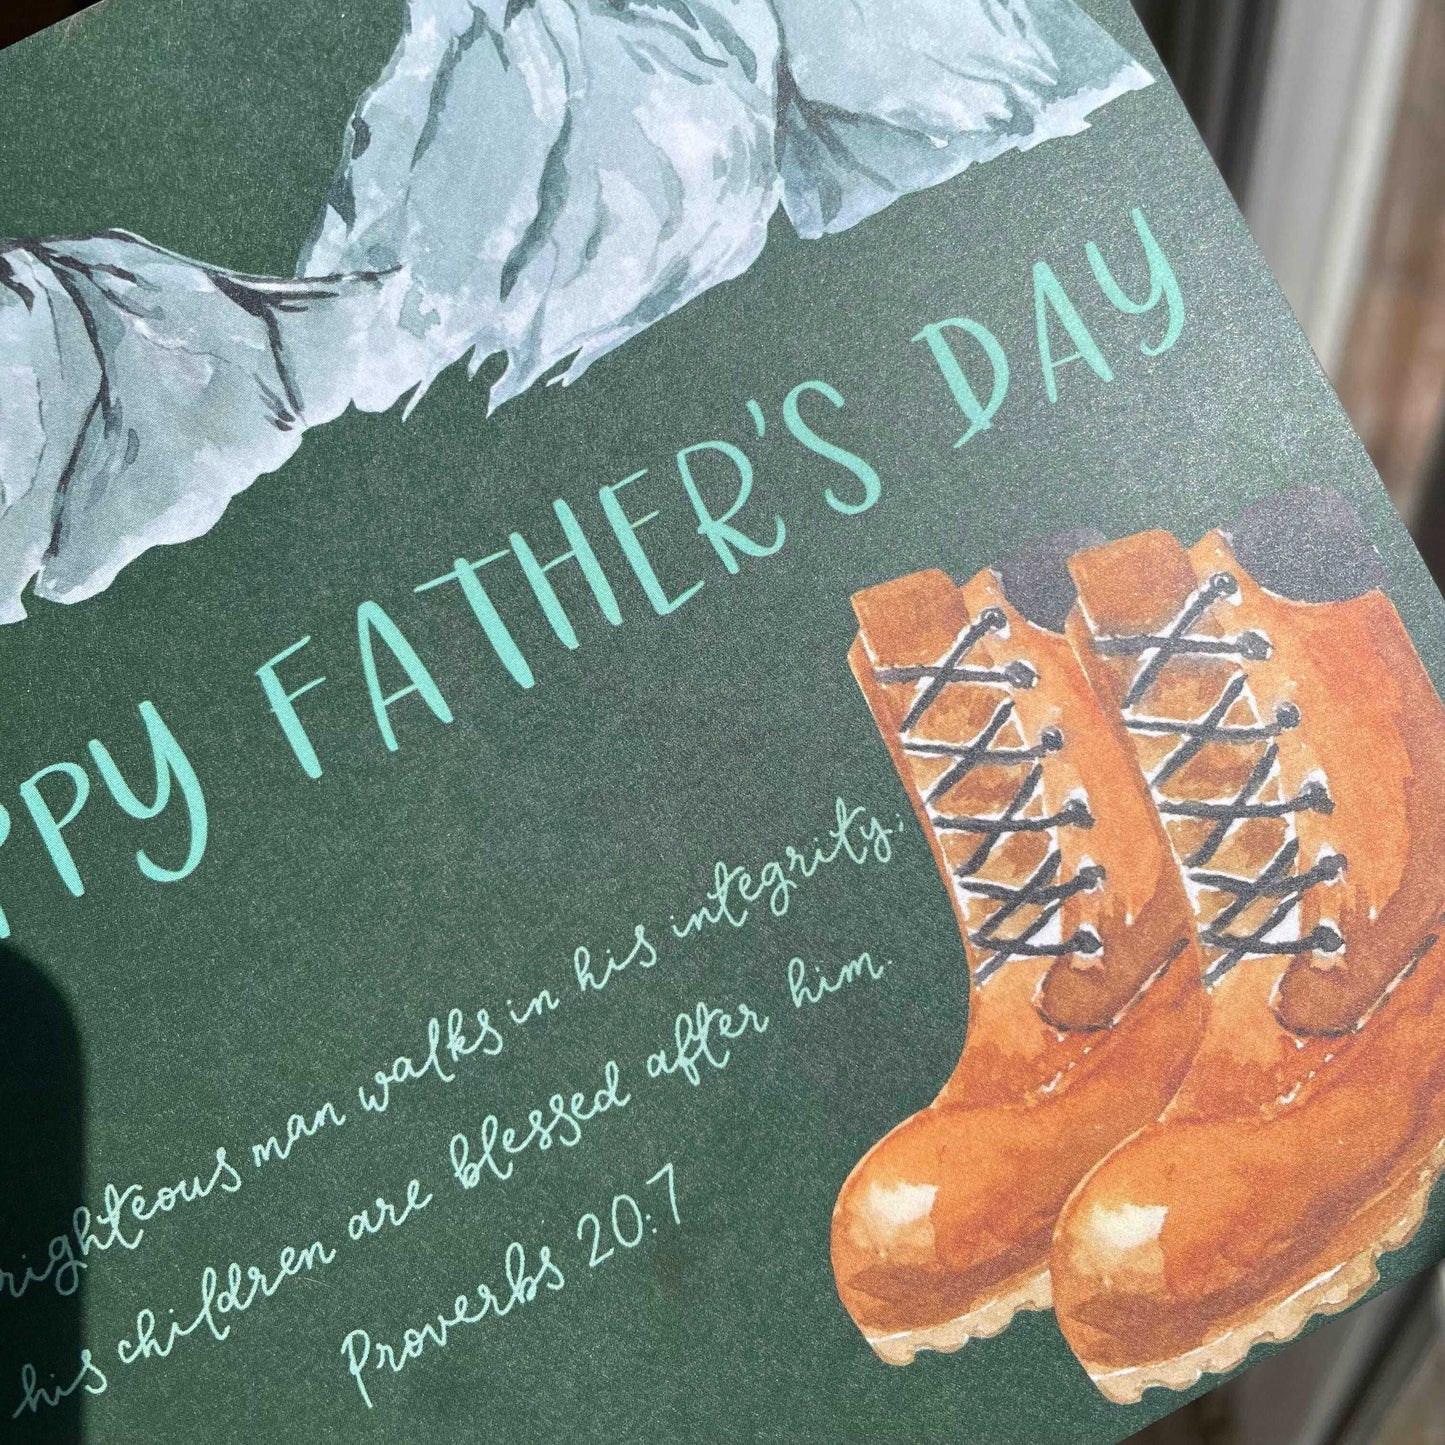 Christian Father's Day card - walking And Hope Designs Cards